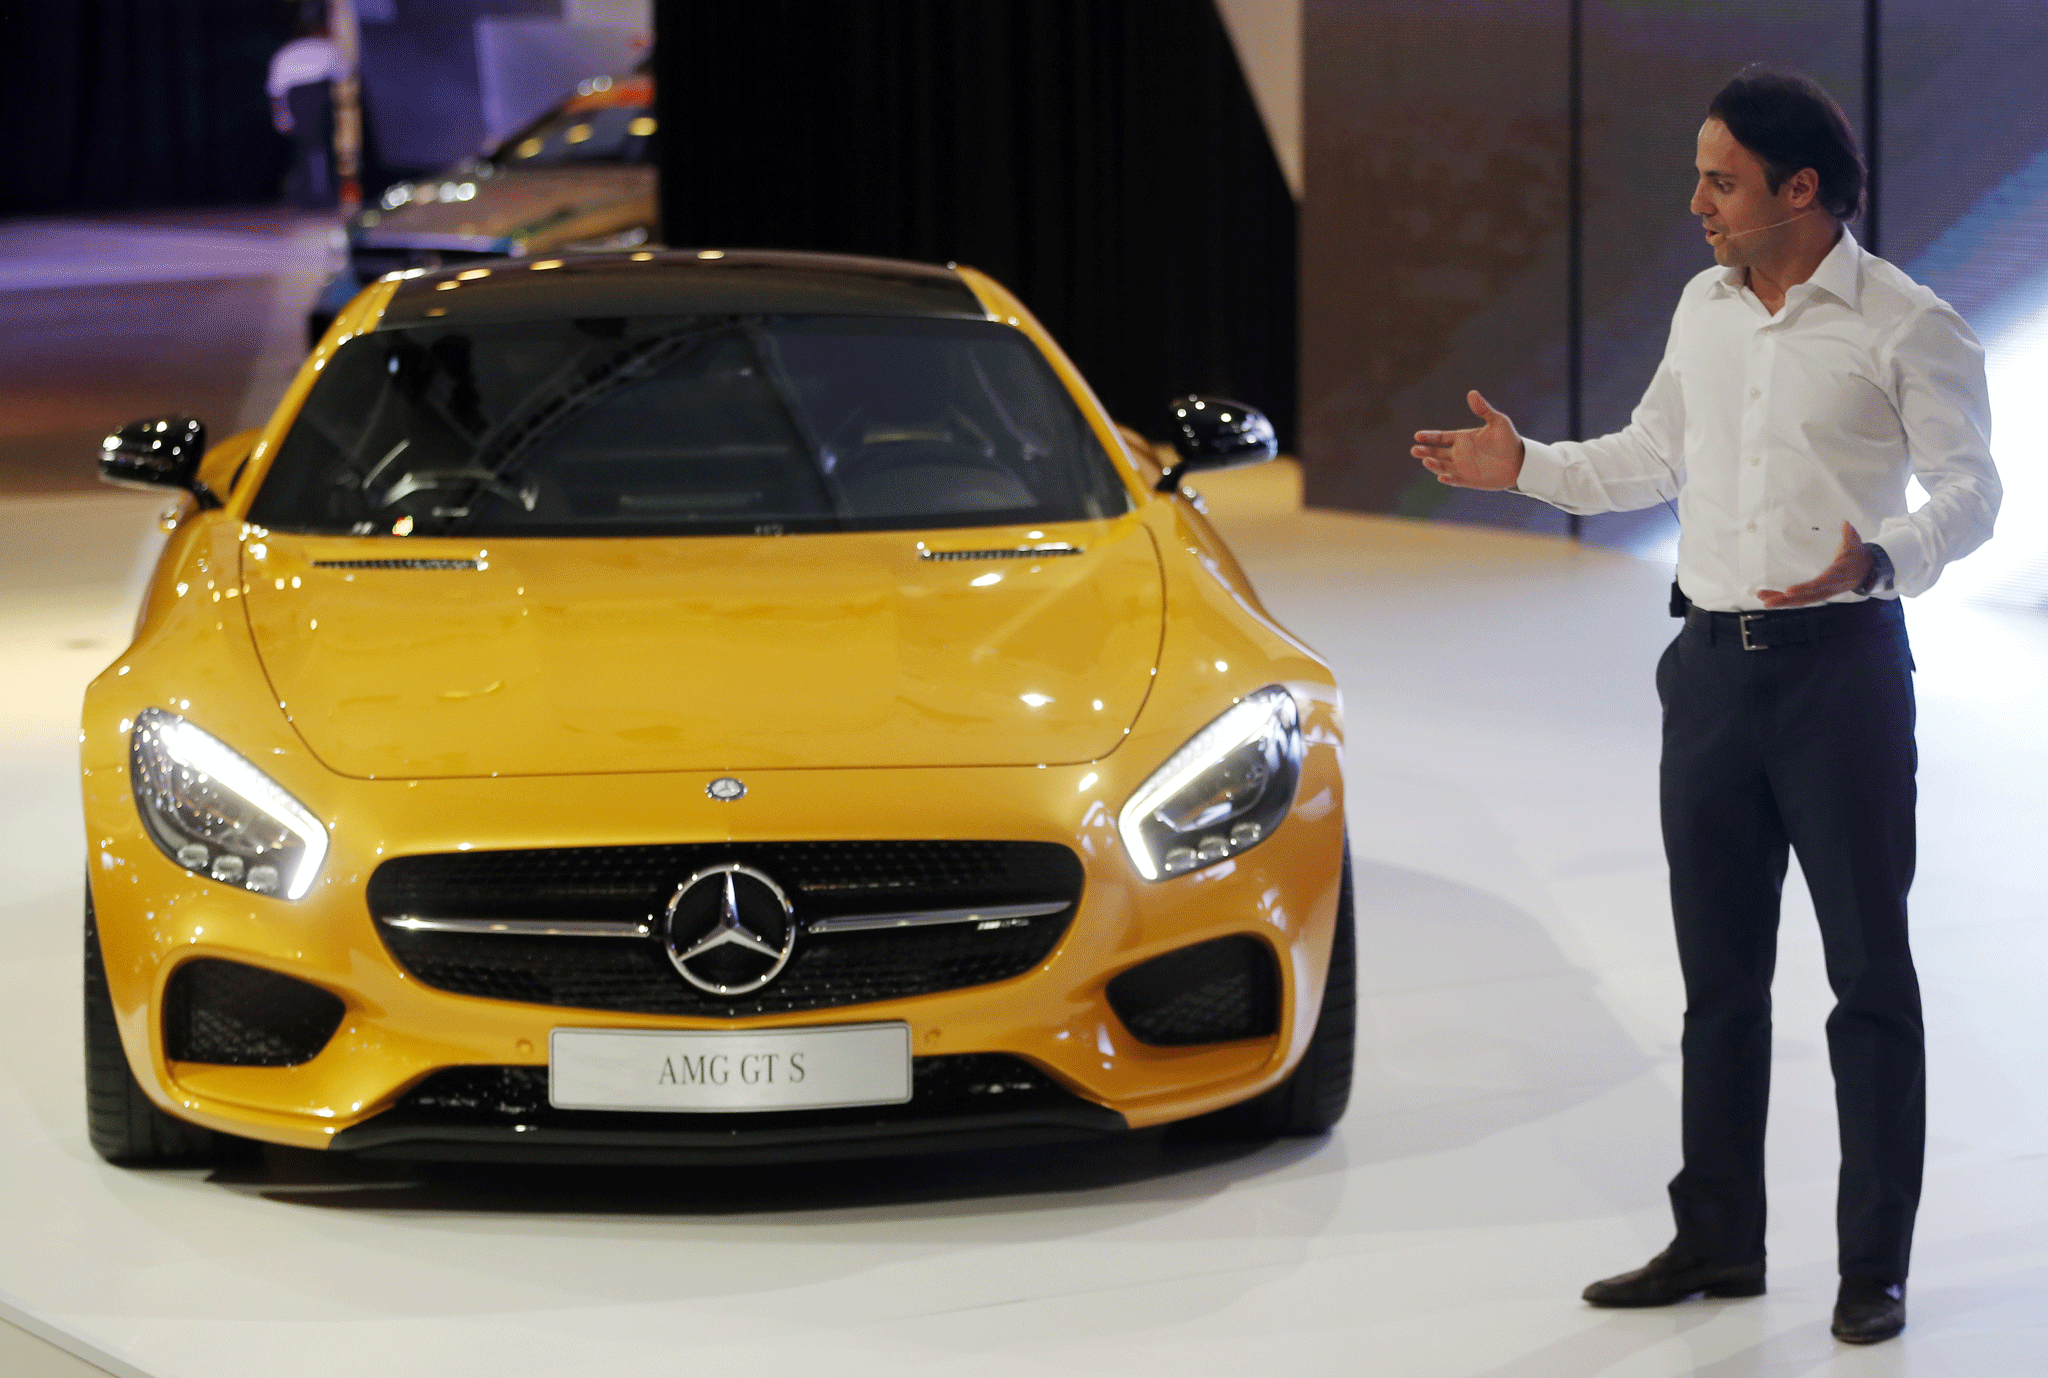 The Mercedez-Benz AMG GT S is €25,000 cheaper in Ireland because of currency movements